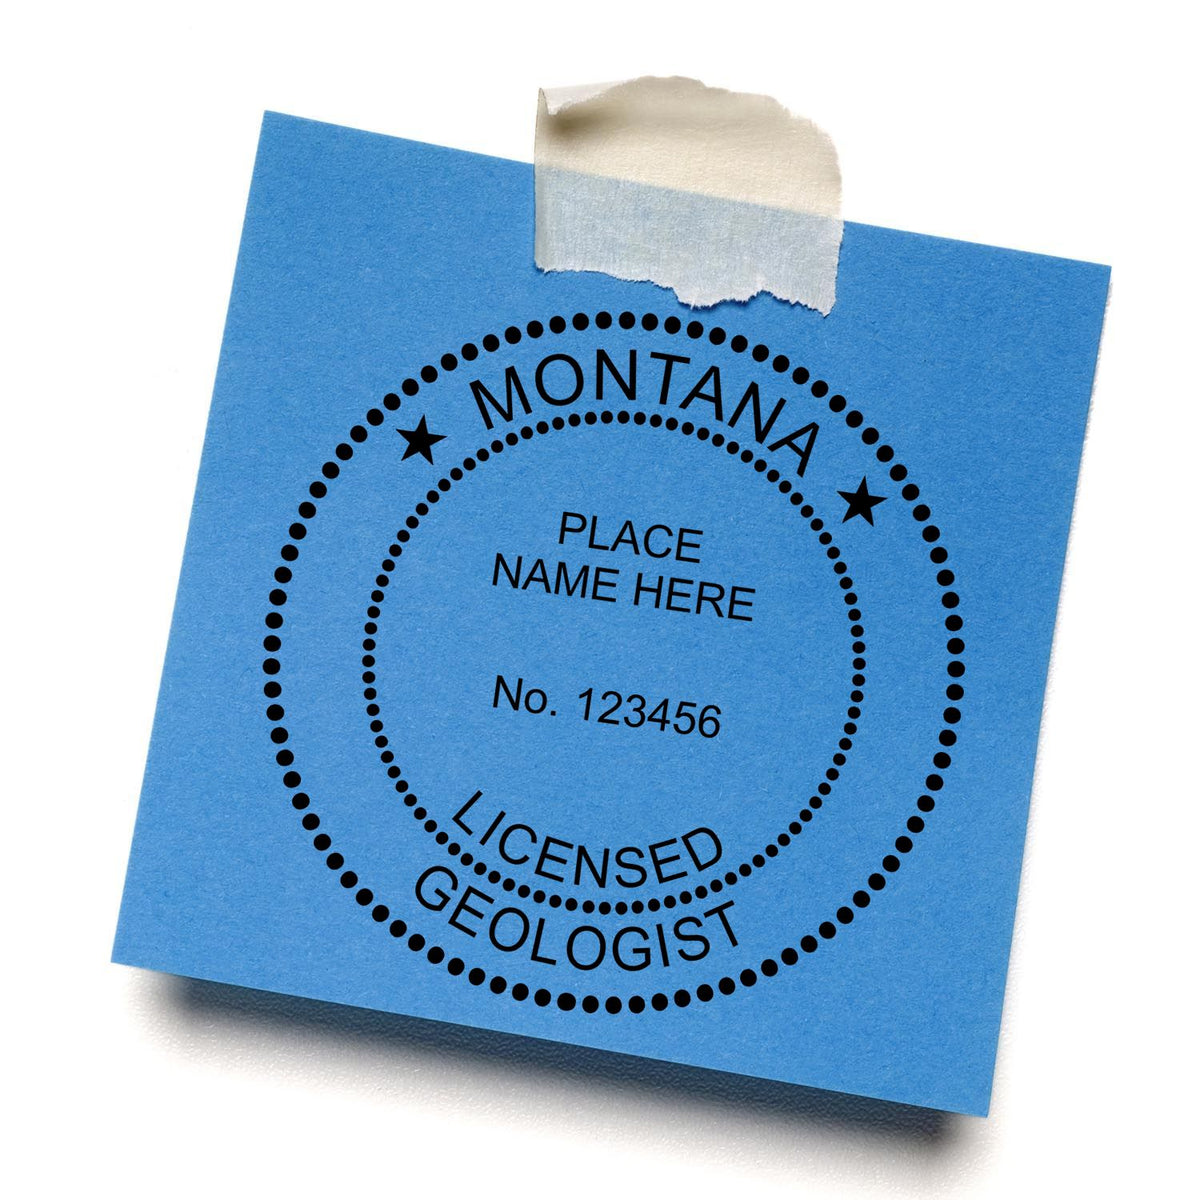 This paper is stamped with a sample imprint of the Premium MaxLight Pre-Inked Montana Geology Stamp, signifying its quality and reliability.